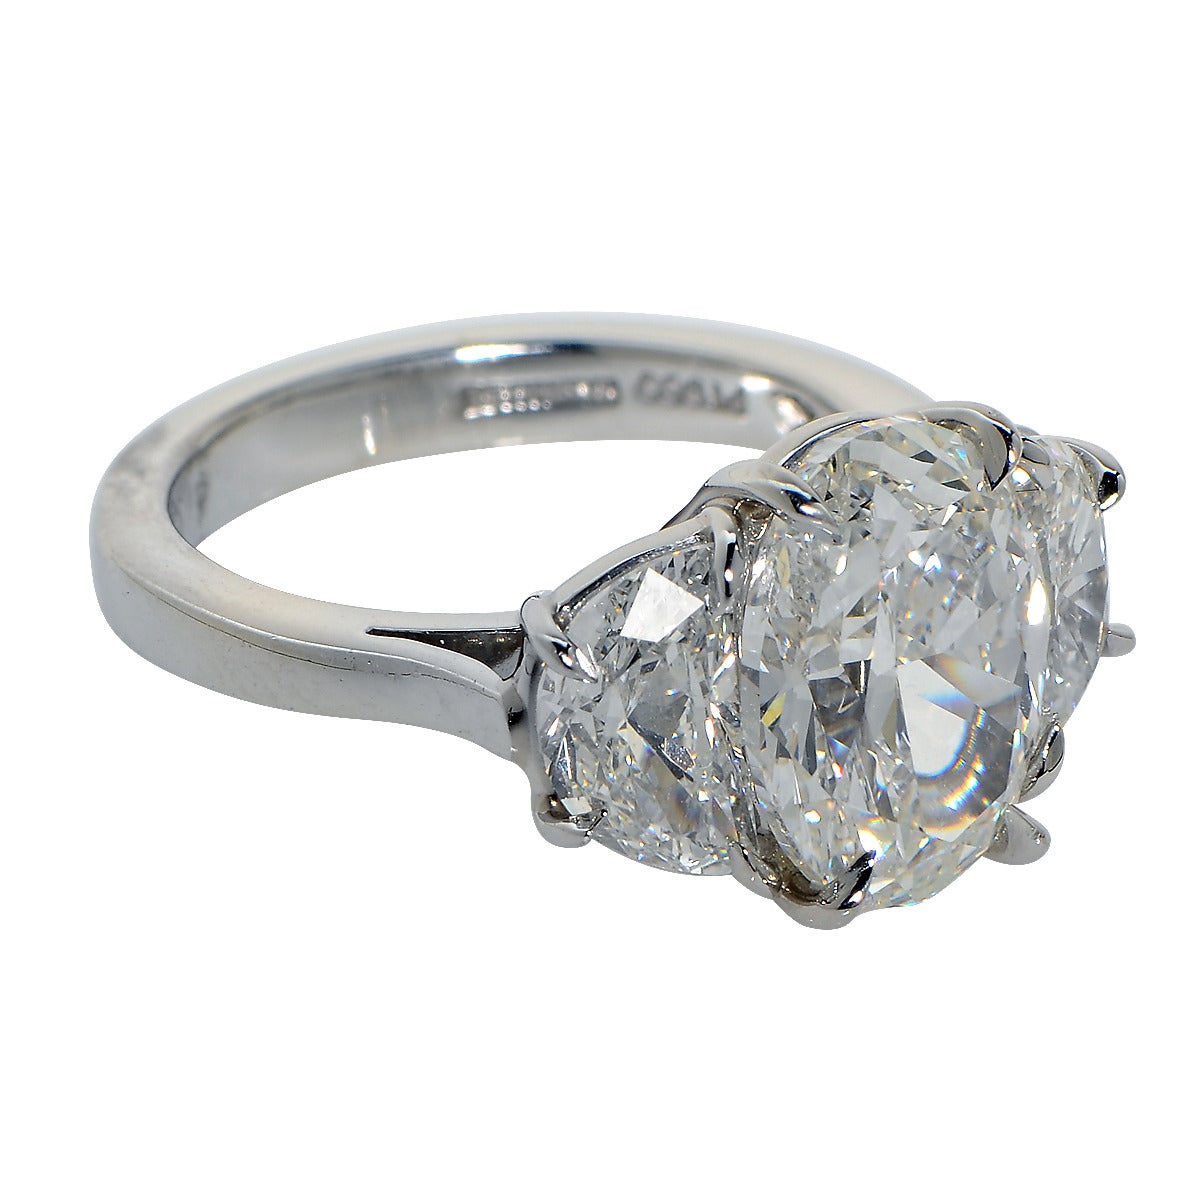 Platinum Custom-Made Ring Containing a 4.03ct Oval Cut Diamond H Color and SI1 Clarity GIA, Flanked by 2 Half Moon Cut Diamonds weighing 1.69ct H Color and VS2 Clarity. Total Diamond Weight is 5.72cts. Ring Size: 6.